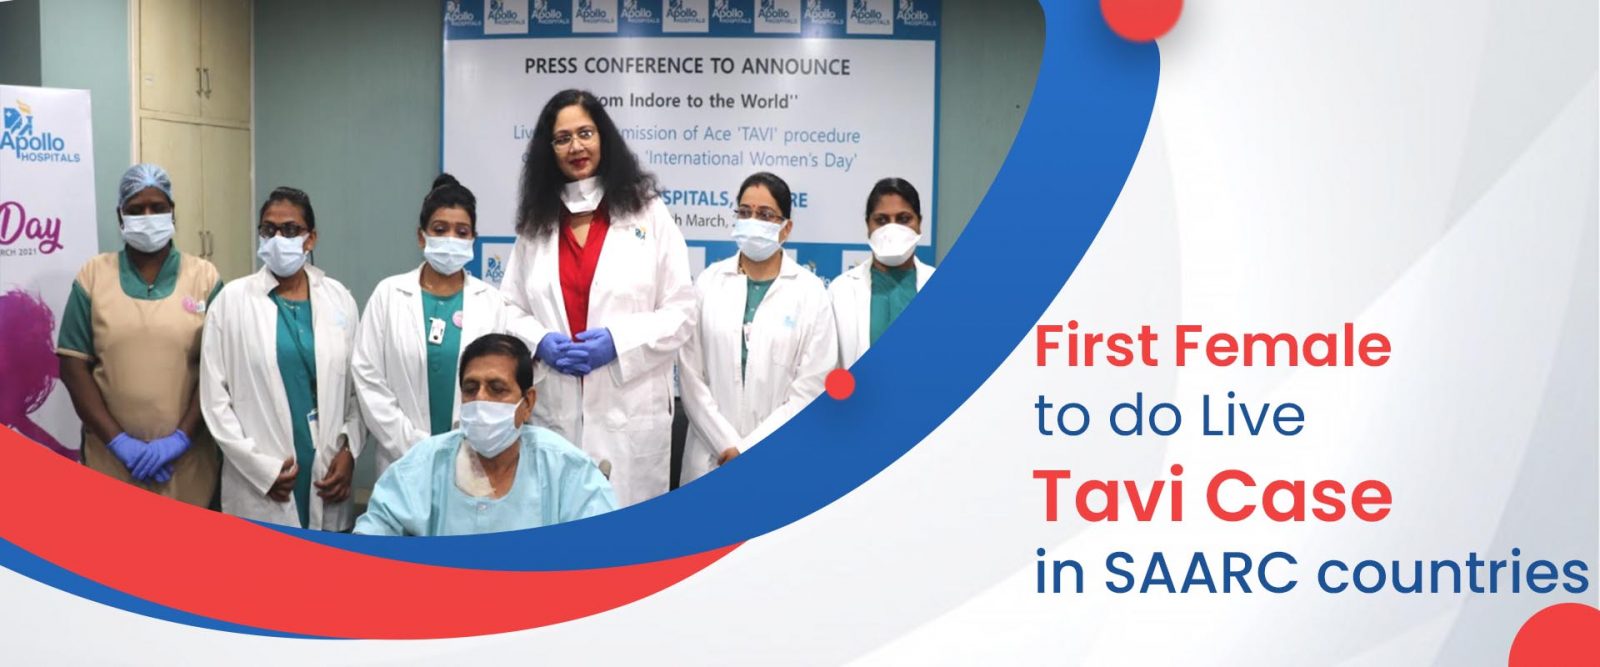 Dr. Sarita Rao & her team who has done First Live TAVI Case in SAARC Countries